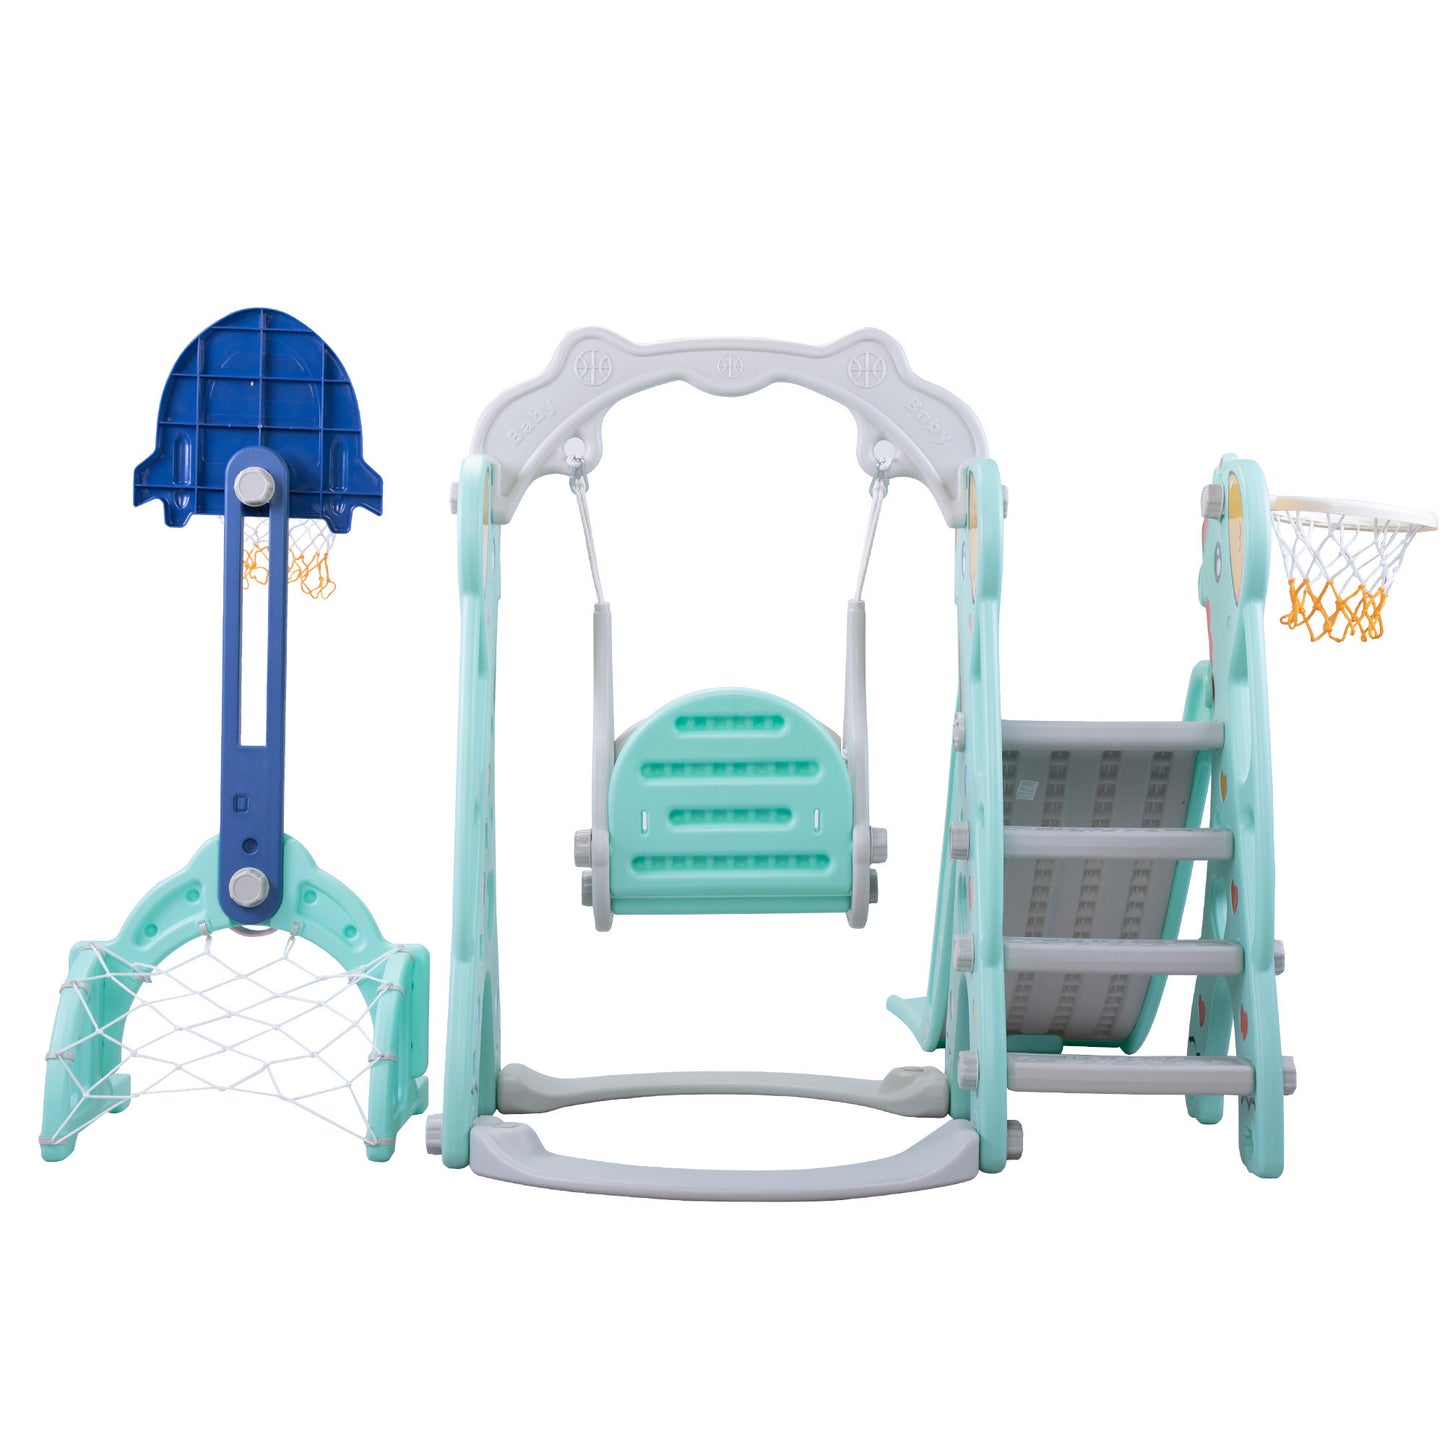 5 in 1 Slide and Swing Playing Set, Toddler Extra-Long Slide with 2 Basketball Hoops, Football, Ringtoss, Indoor Outdoor